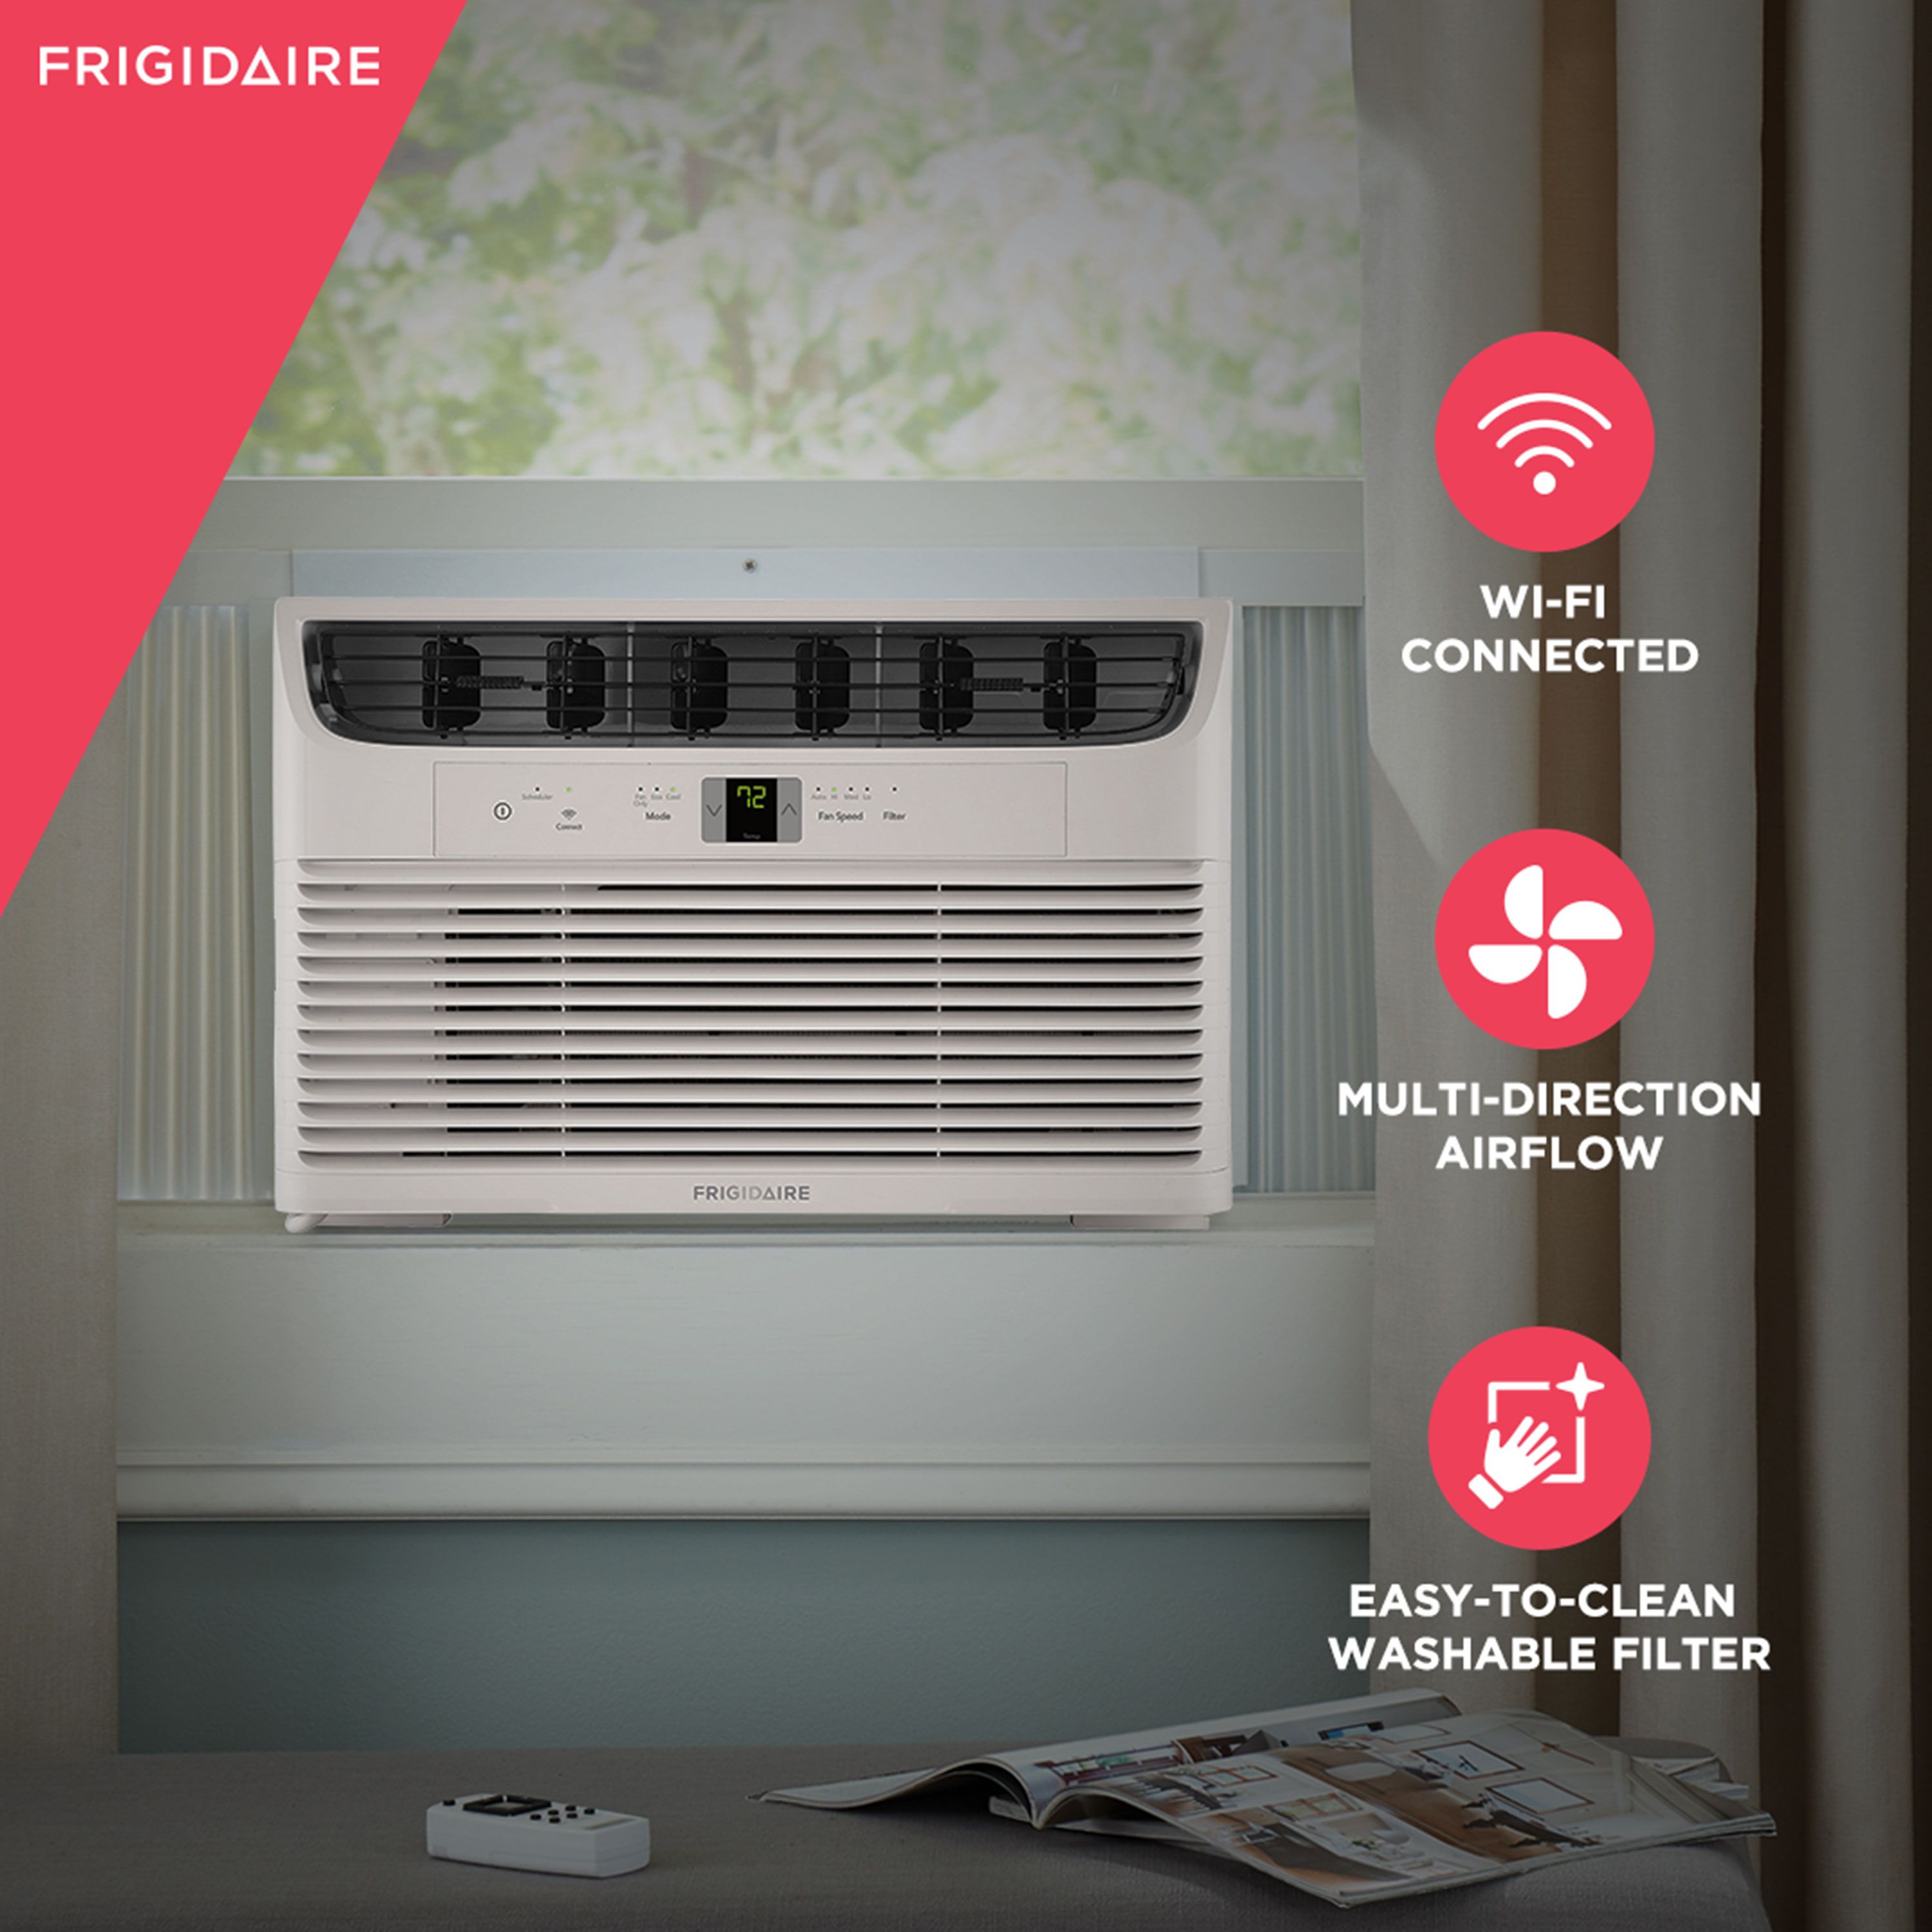 Frigidaire 10,000 BTU 115-Volt Window Air Conditioner with Remote, WIFI, White, FHWW102WCE - image 3 of 3